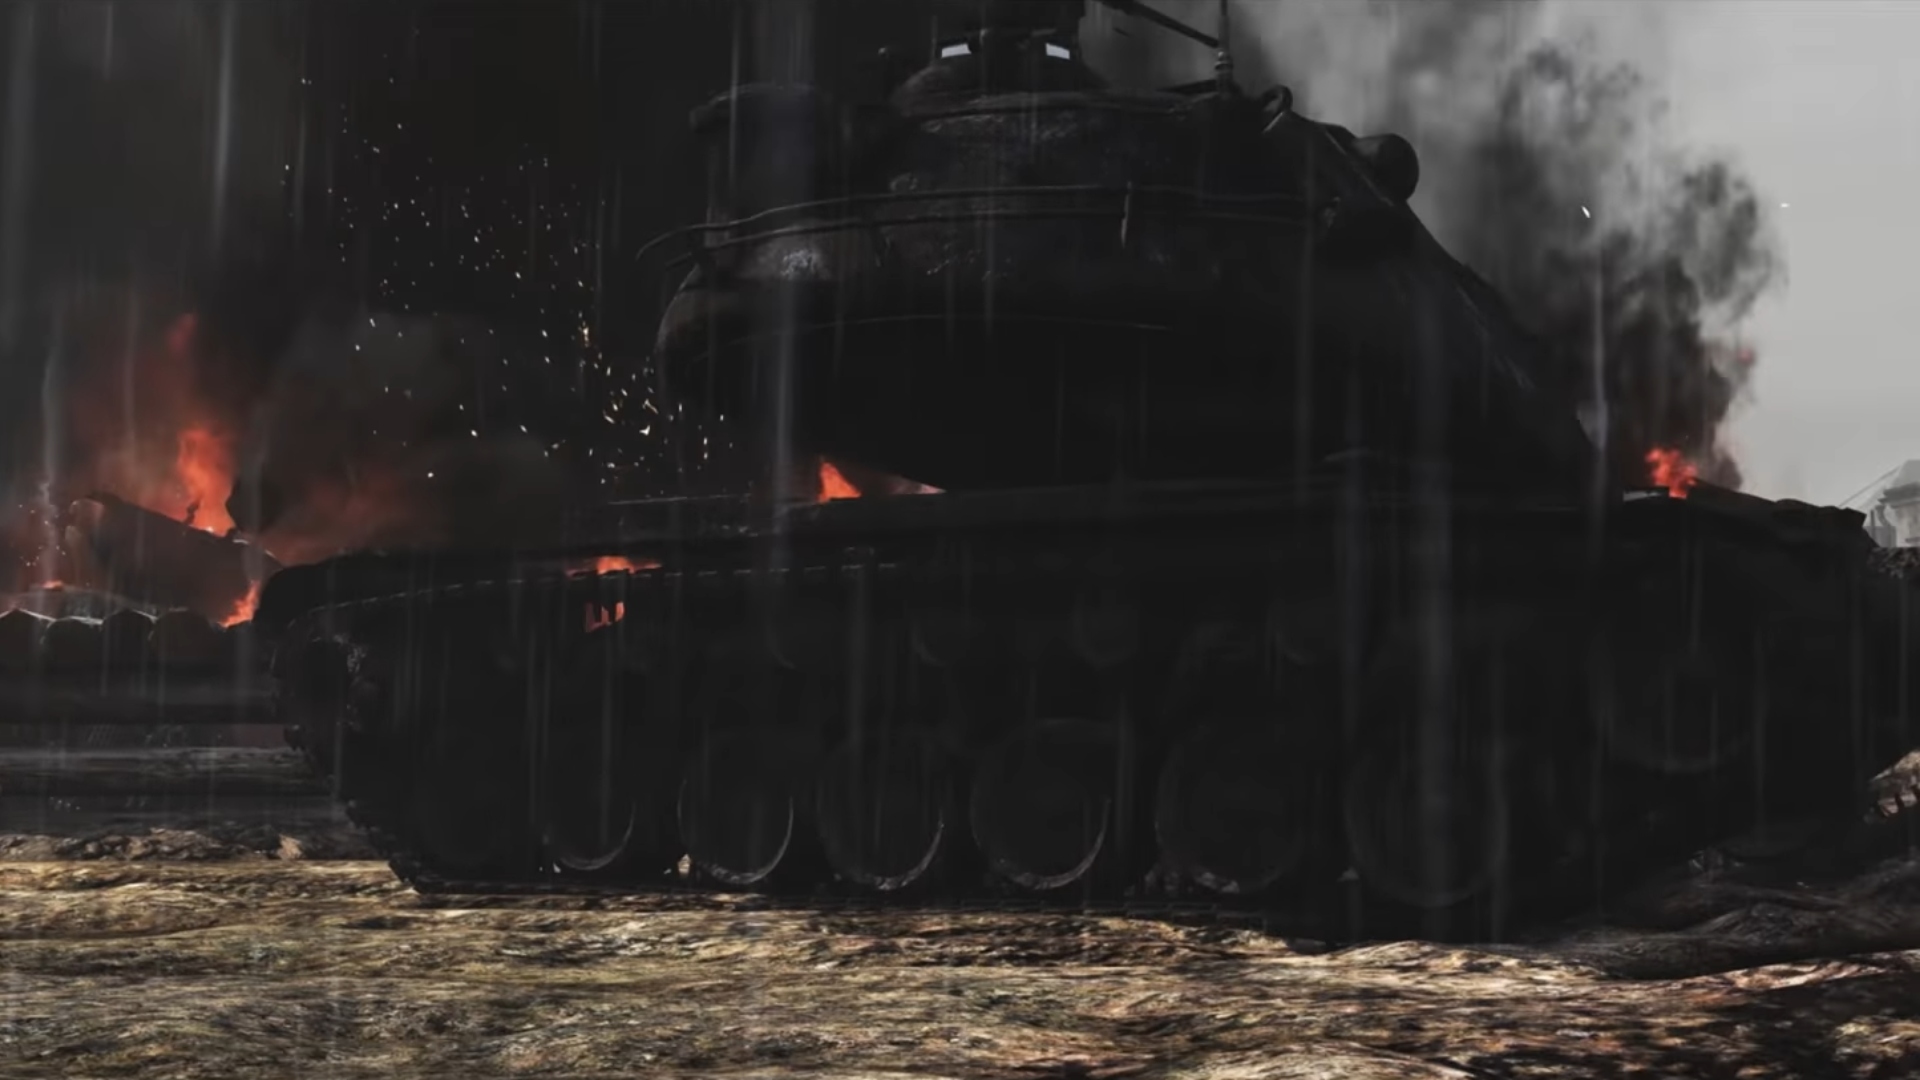 Best world war 2 games: A large tank smokes as rain pours in War Thunder